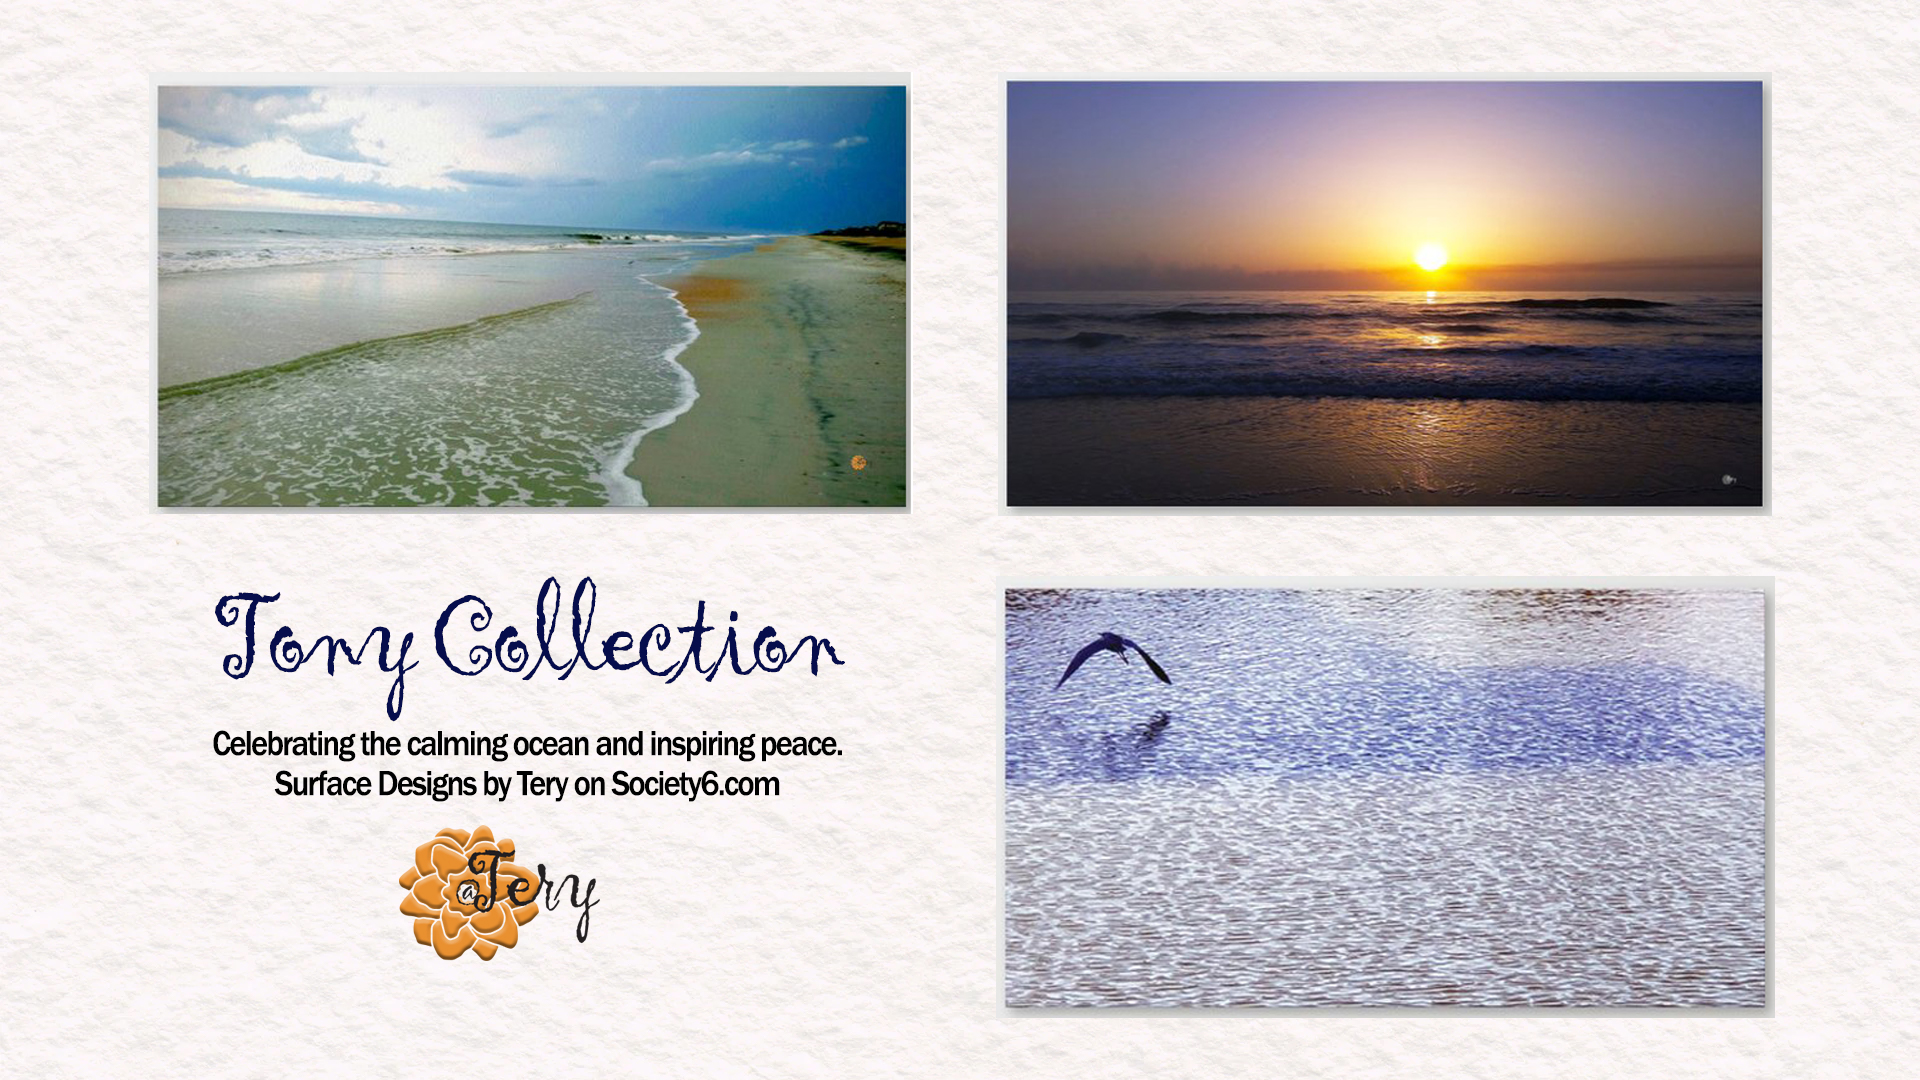 Tony Collection New Surface Designs Celebrating the Ocean